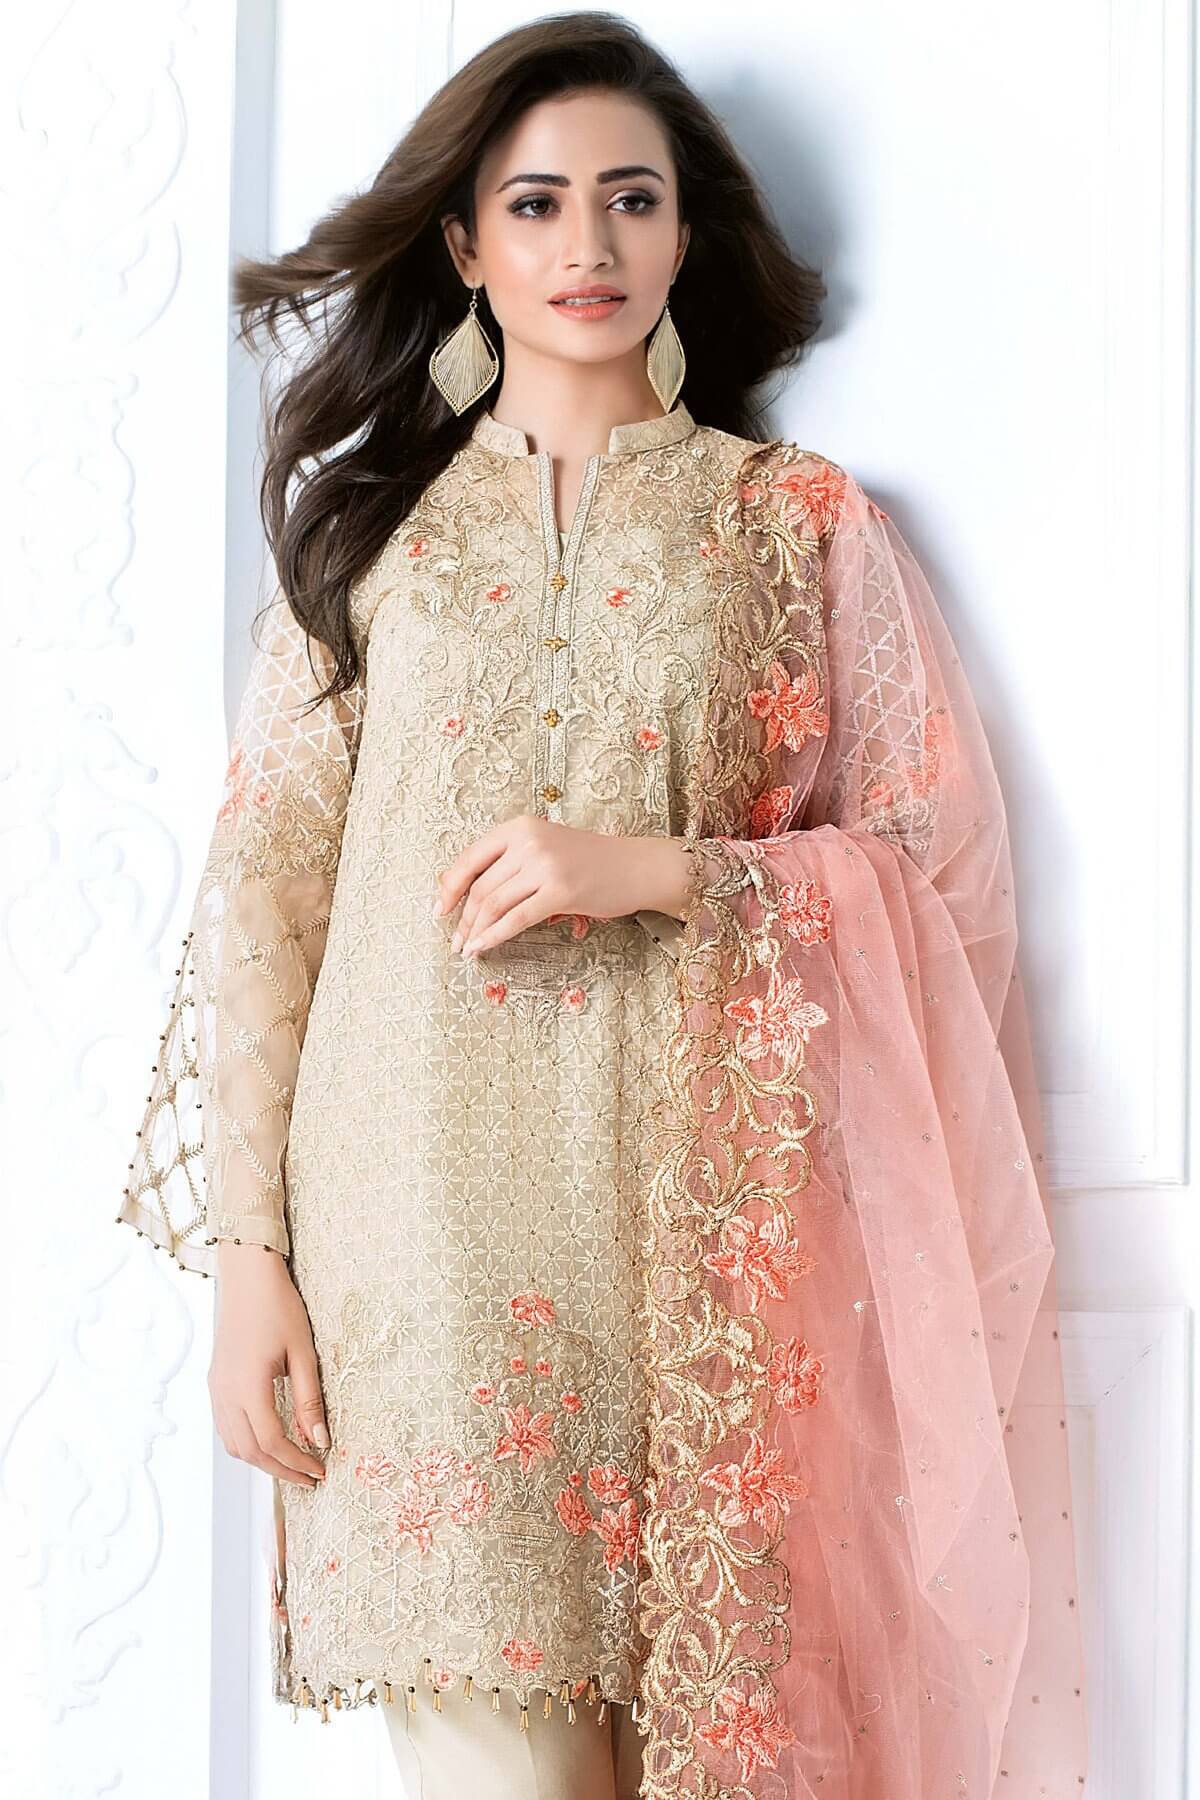 Gul Ahmed party wear 2022 Dresses Images 2022